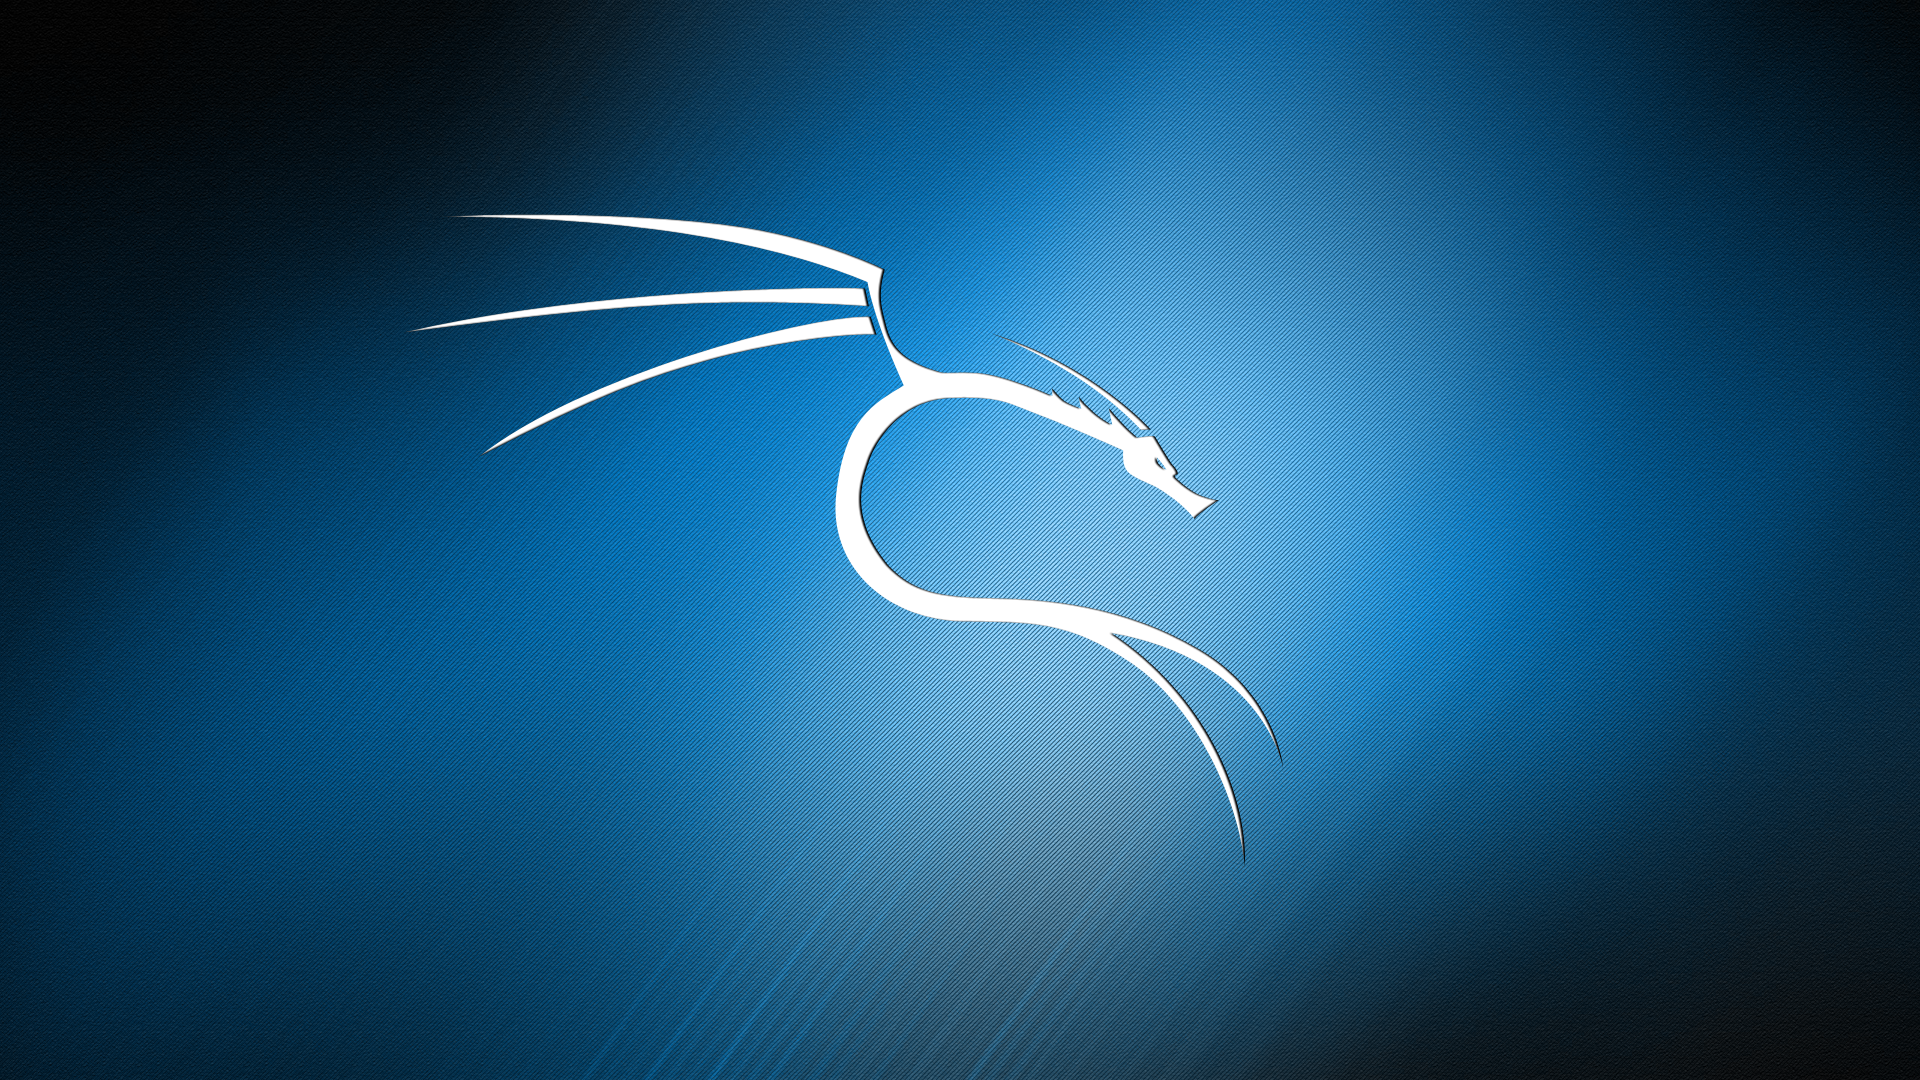 Kali Linux Linux Texture Dragon Abstract Blue Background 1920x1080